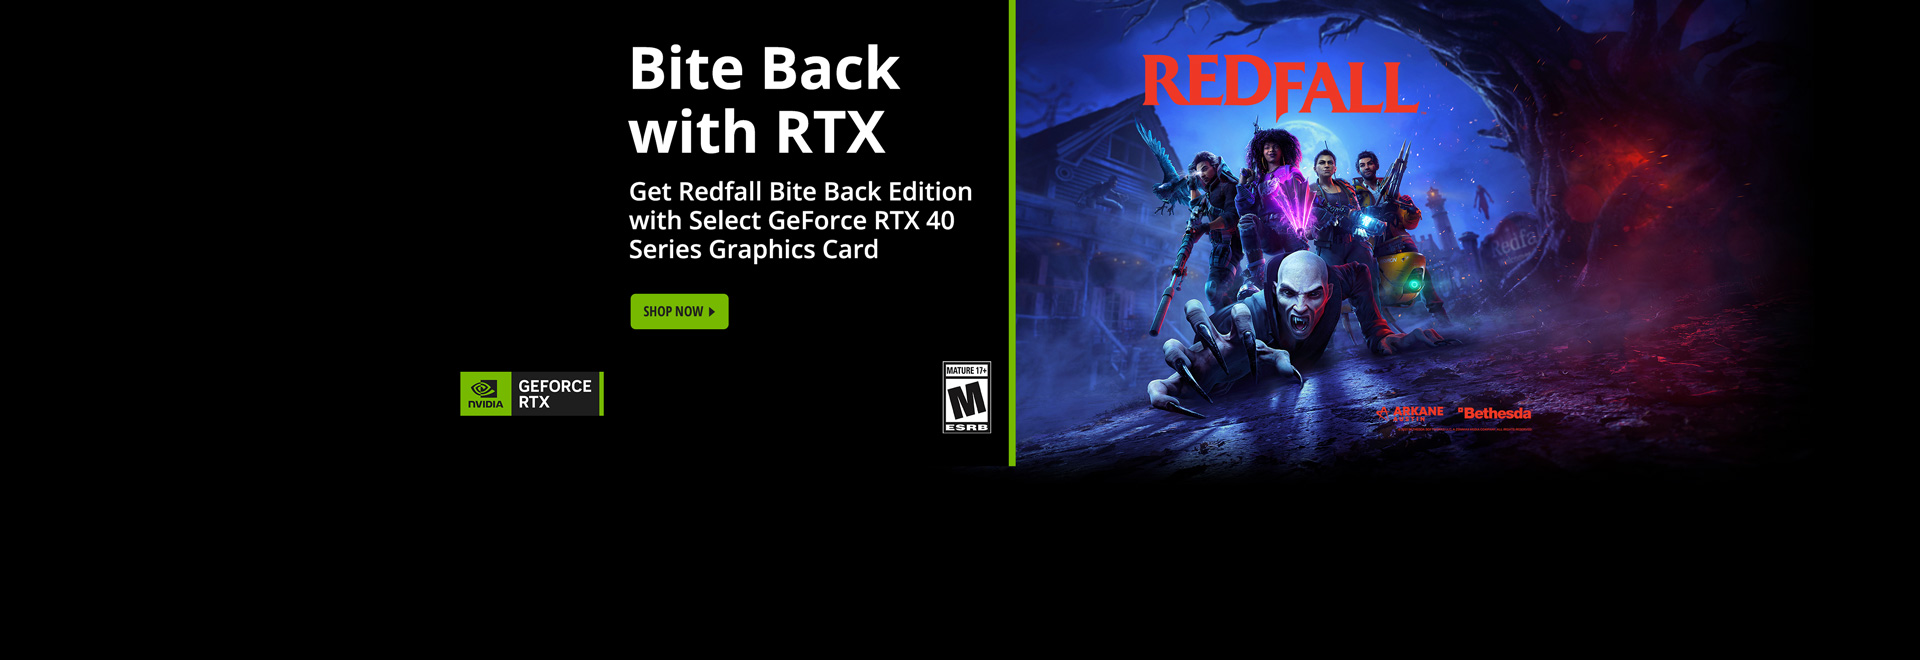 Bite Back with RTX